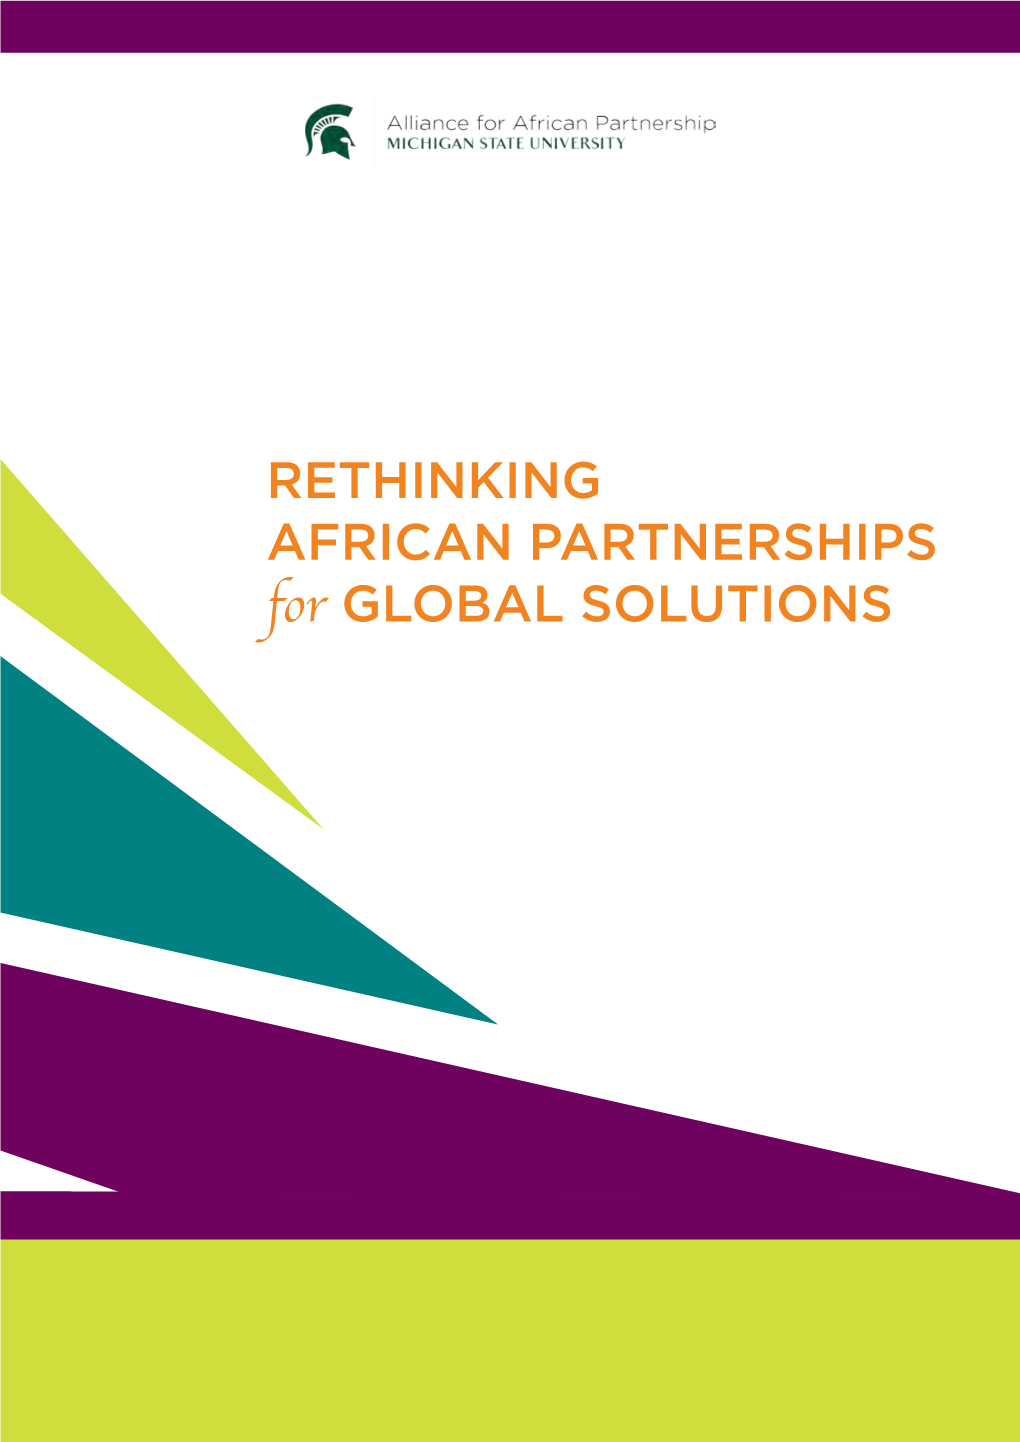 RETHINKING AFRICAN PARTNERSHIPS for GLOBAL SOLUTIONS © Michigan State University RETHINKING AFRICAN PARTNERSHIPS for GLOBAL SOLUTIONS